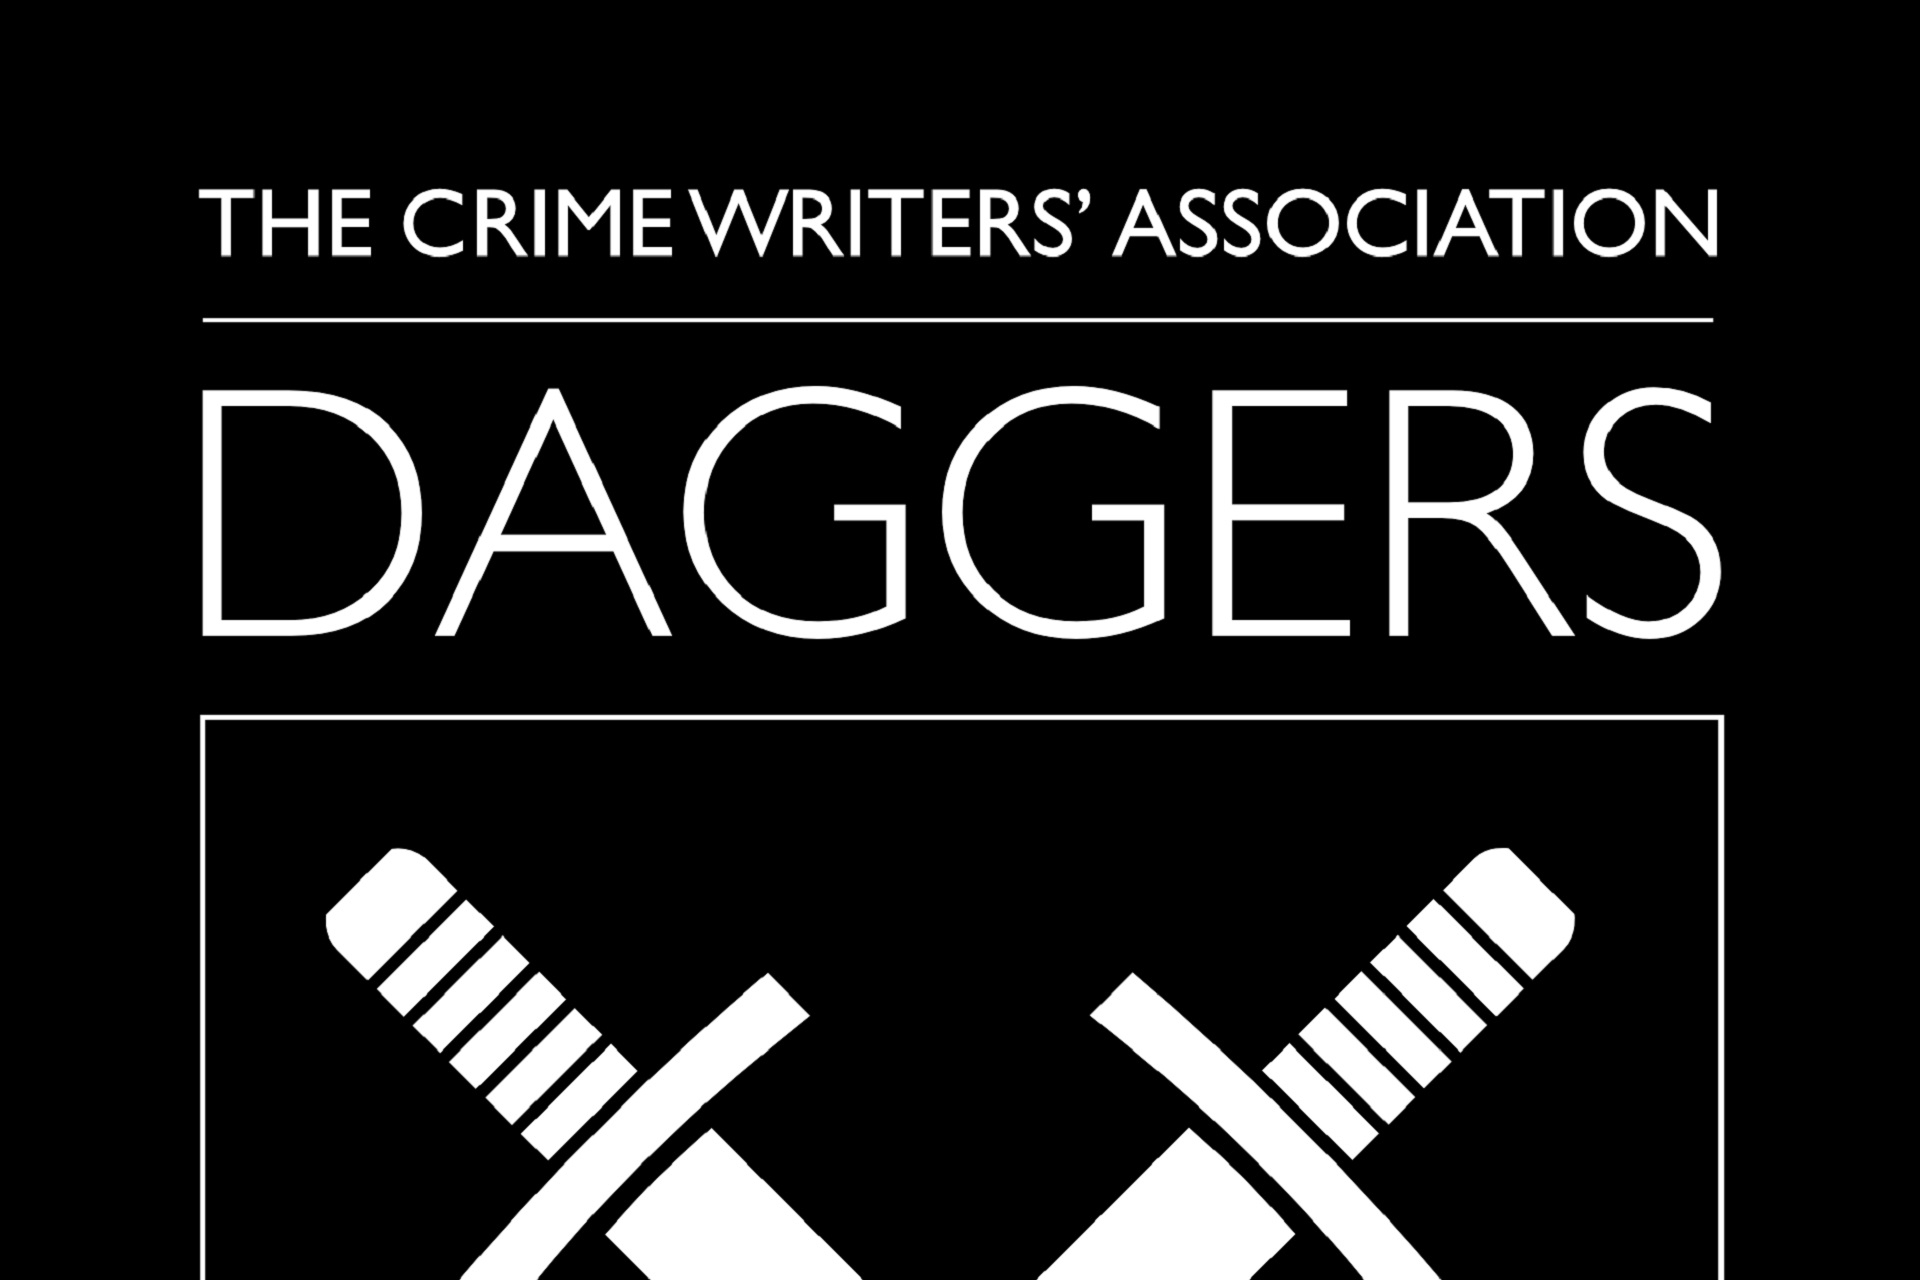 Crime Writers' Association Dagger Awards Longlists Announced for 2022